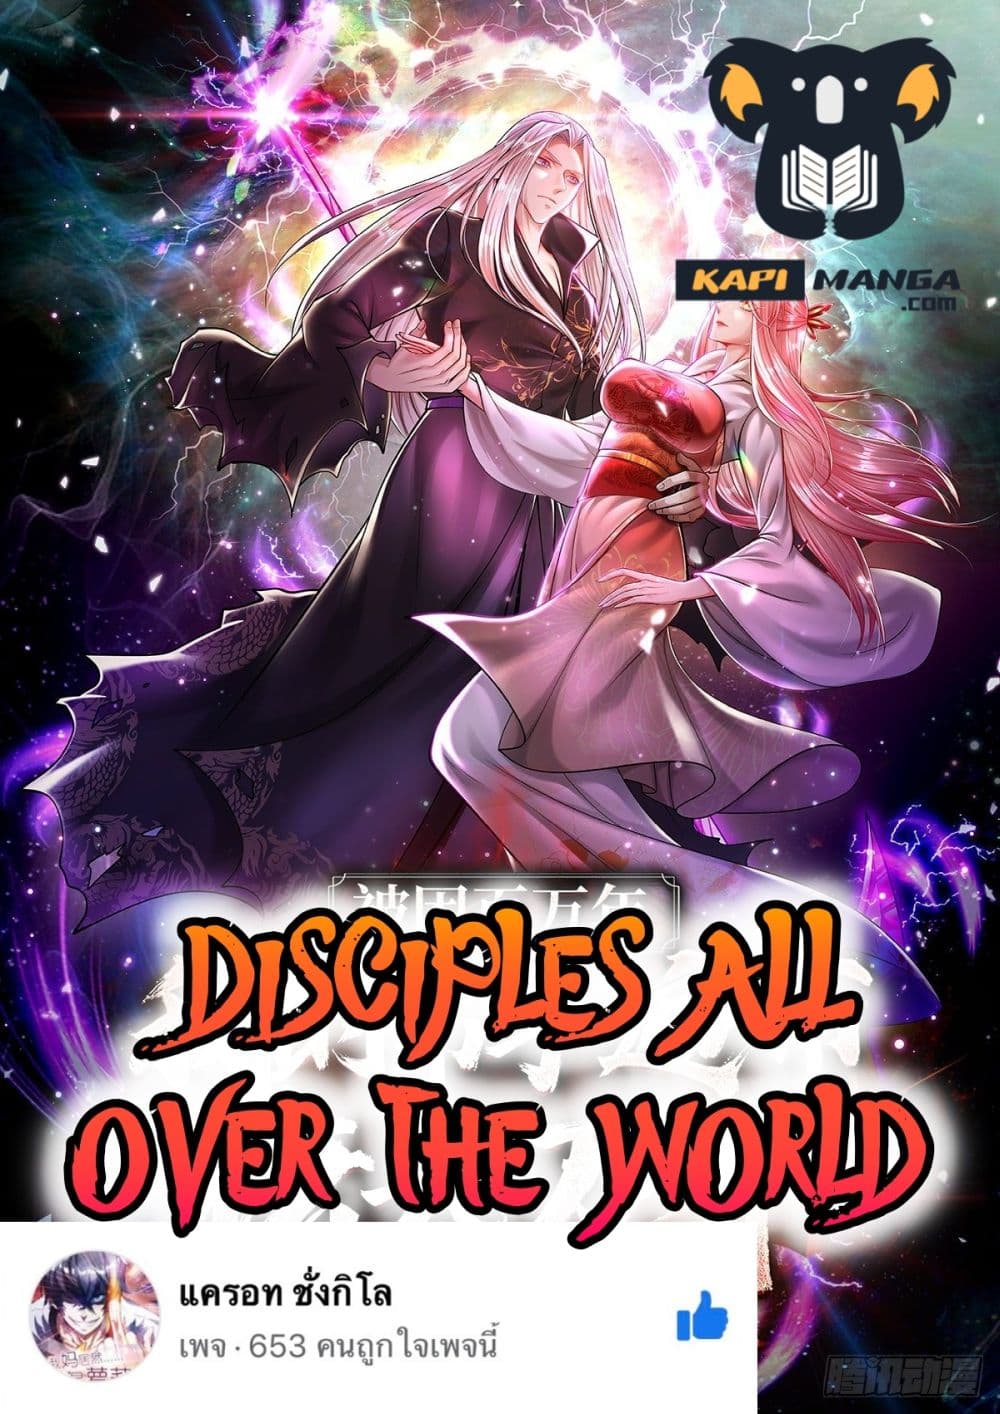 Disciples All Over the World à¸à¸­à¸à¸à¸µà¹ 61 (1)